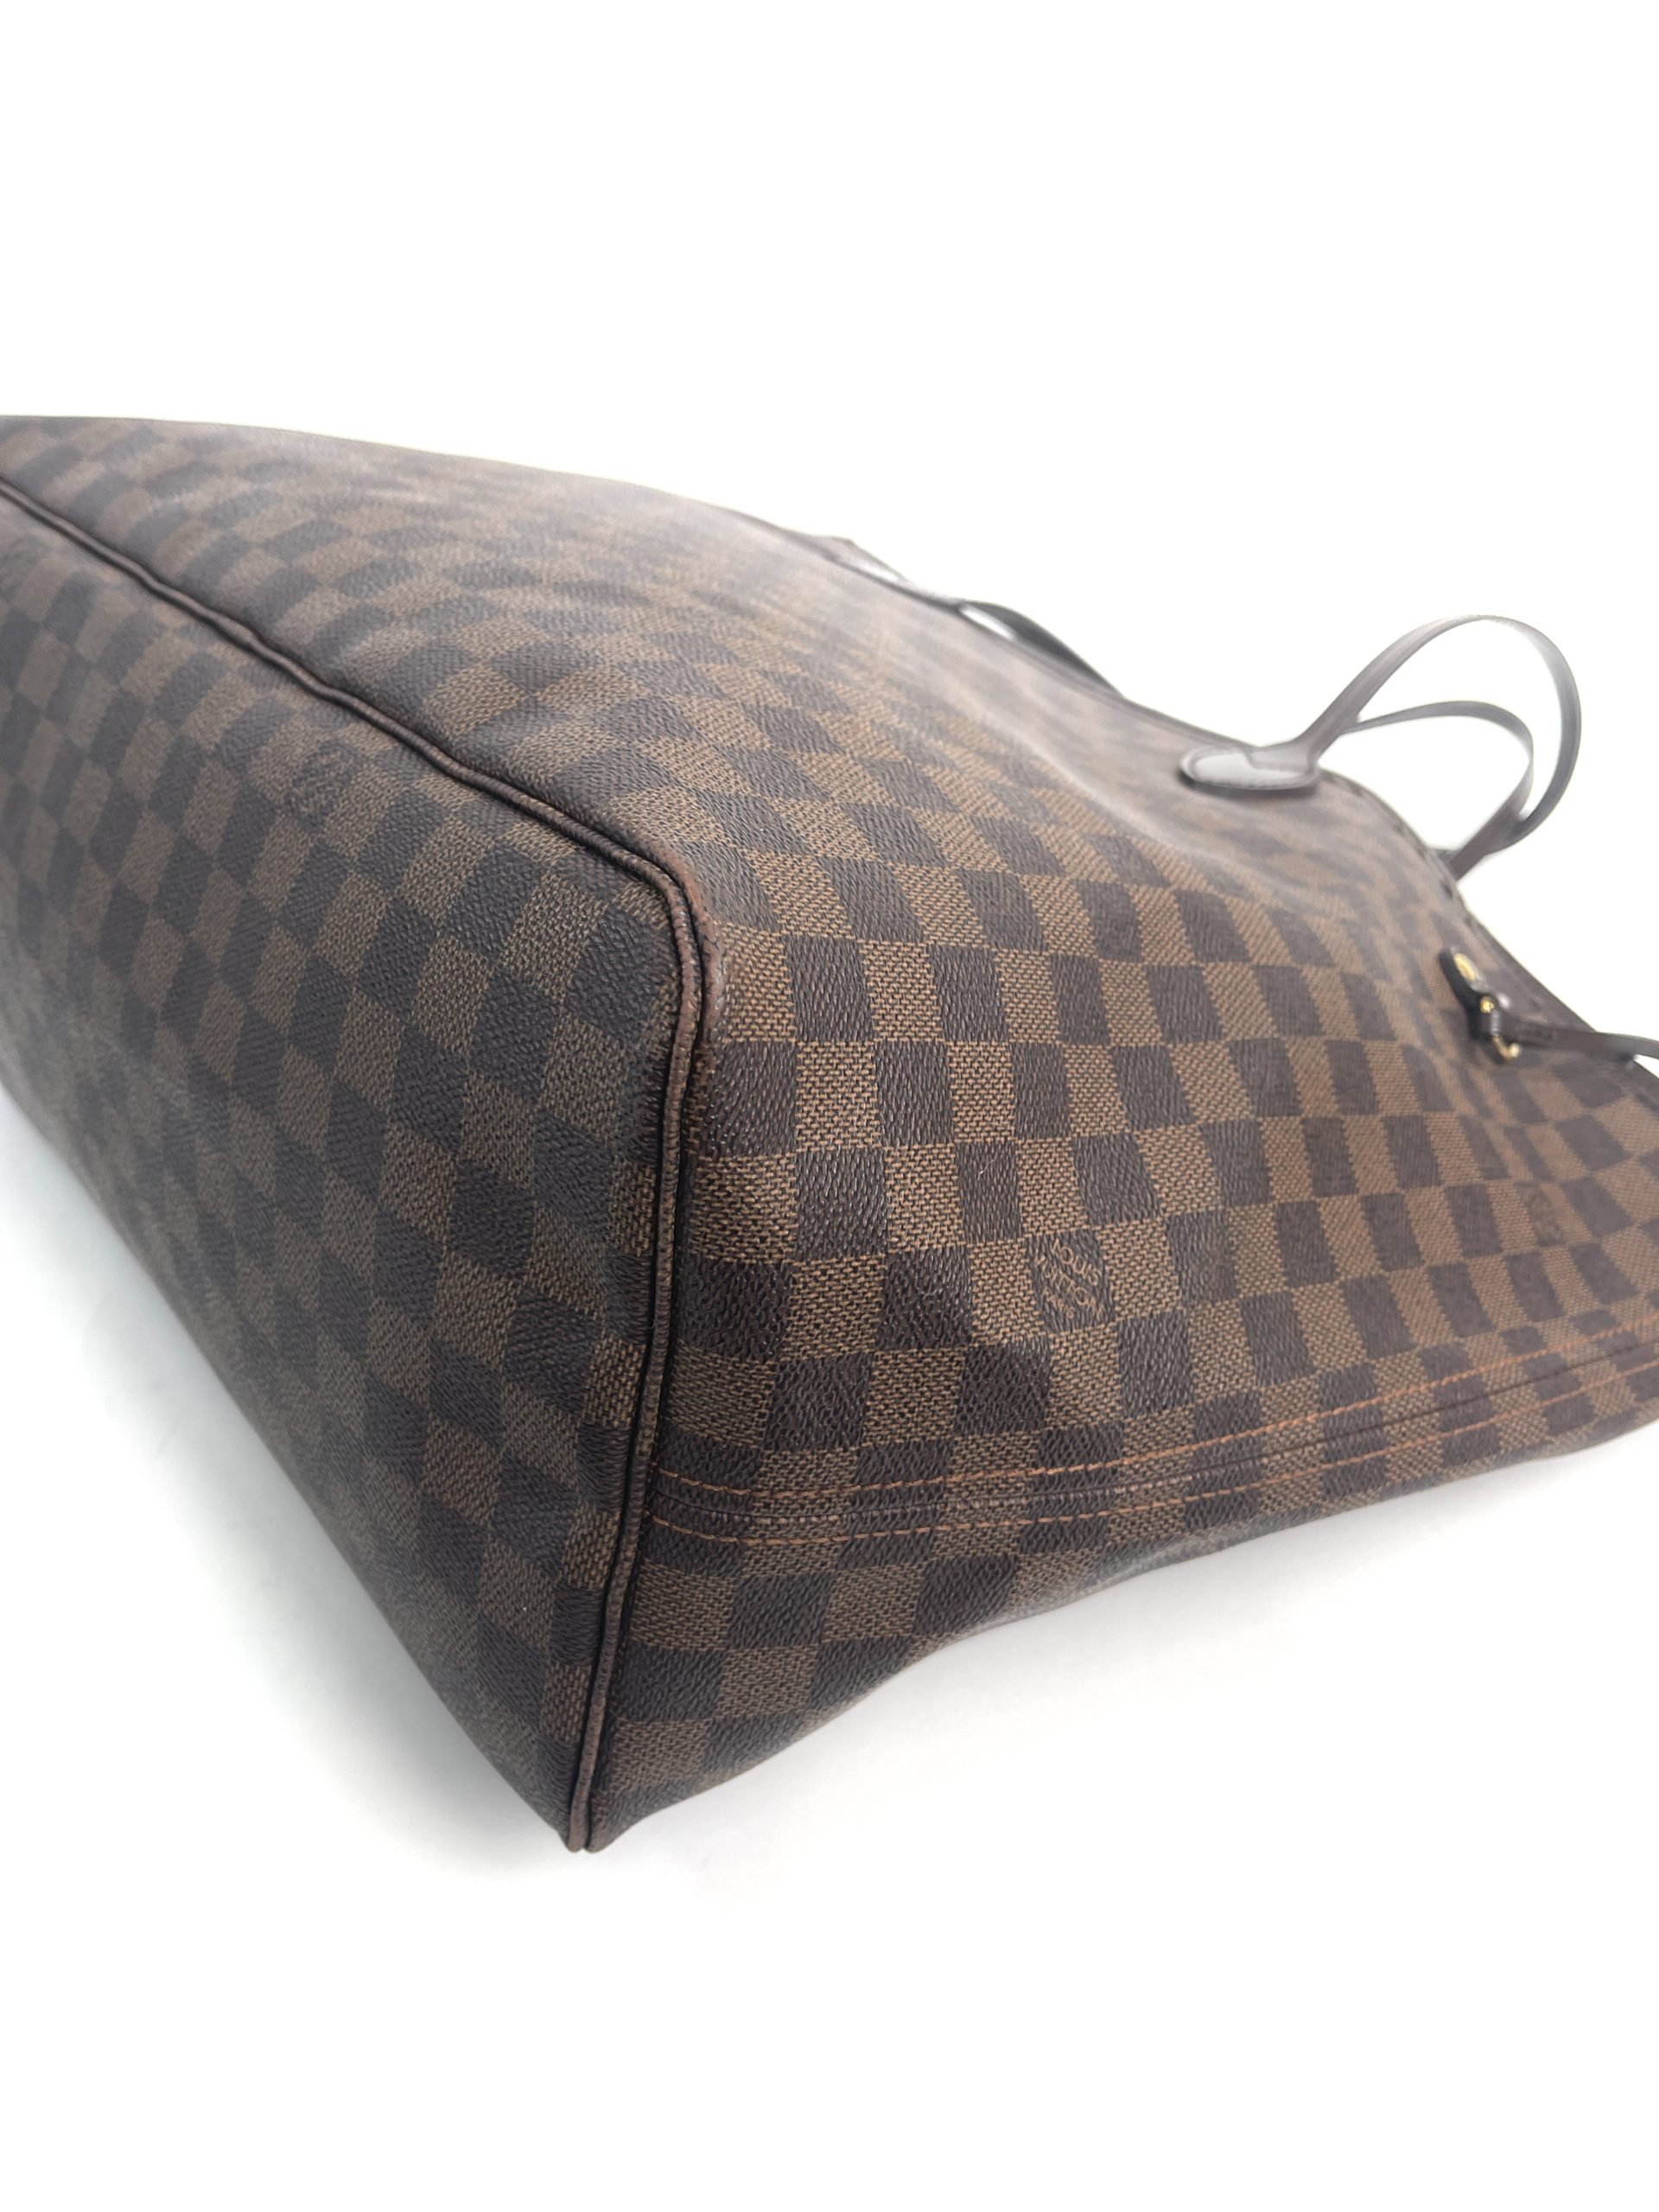 Authentic Louis Vuitton Neverfull MM Tote Bag in Damier Ebene